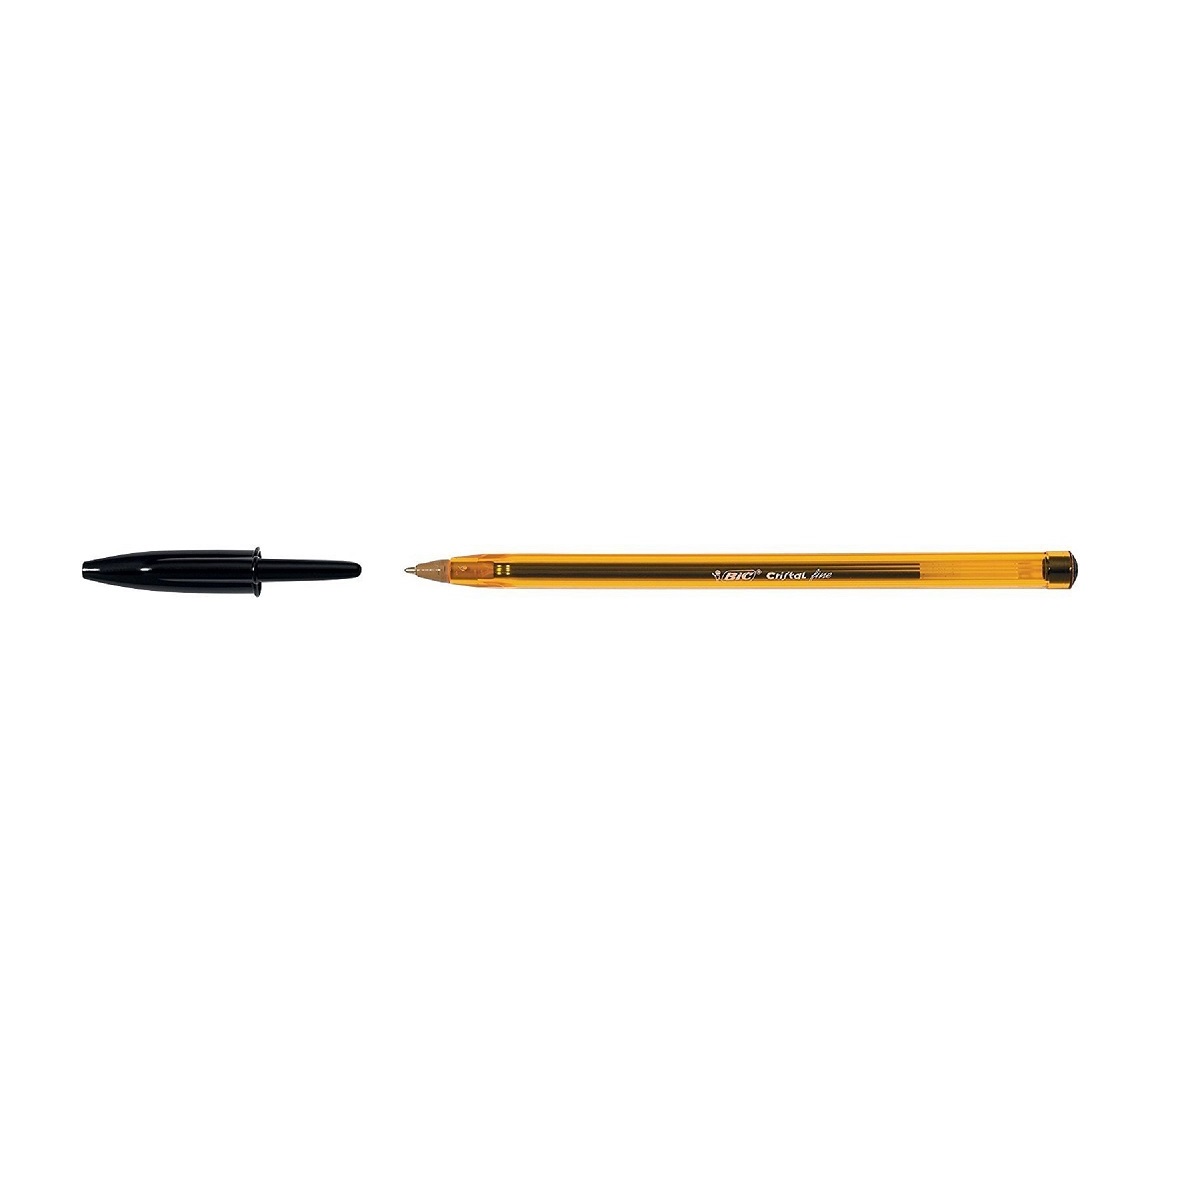 Bic Cristal Fine Pen – office stationery and supplies